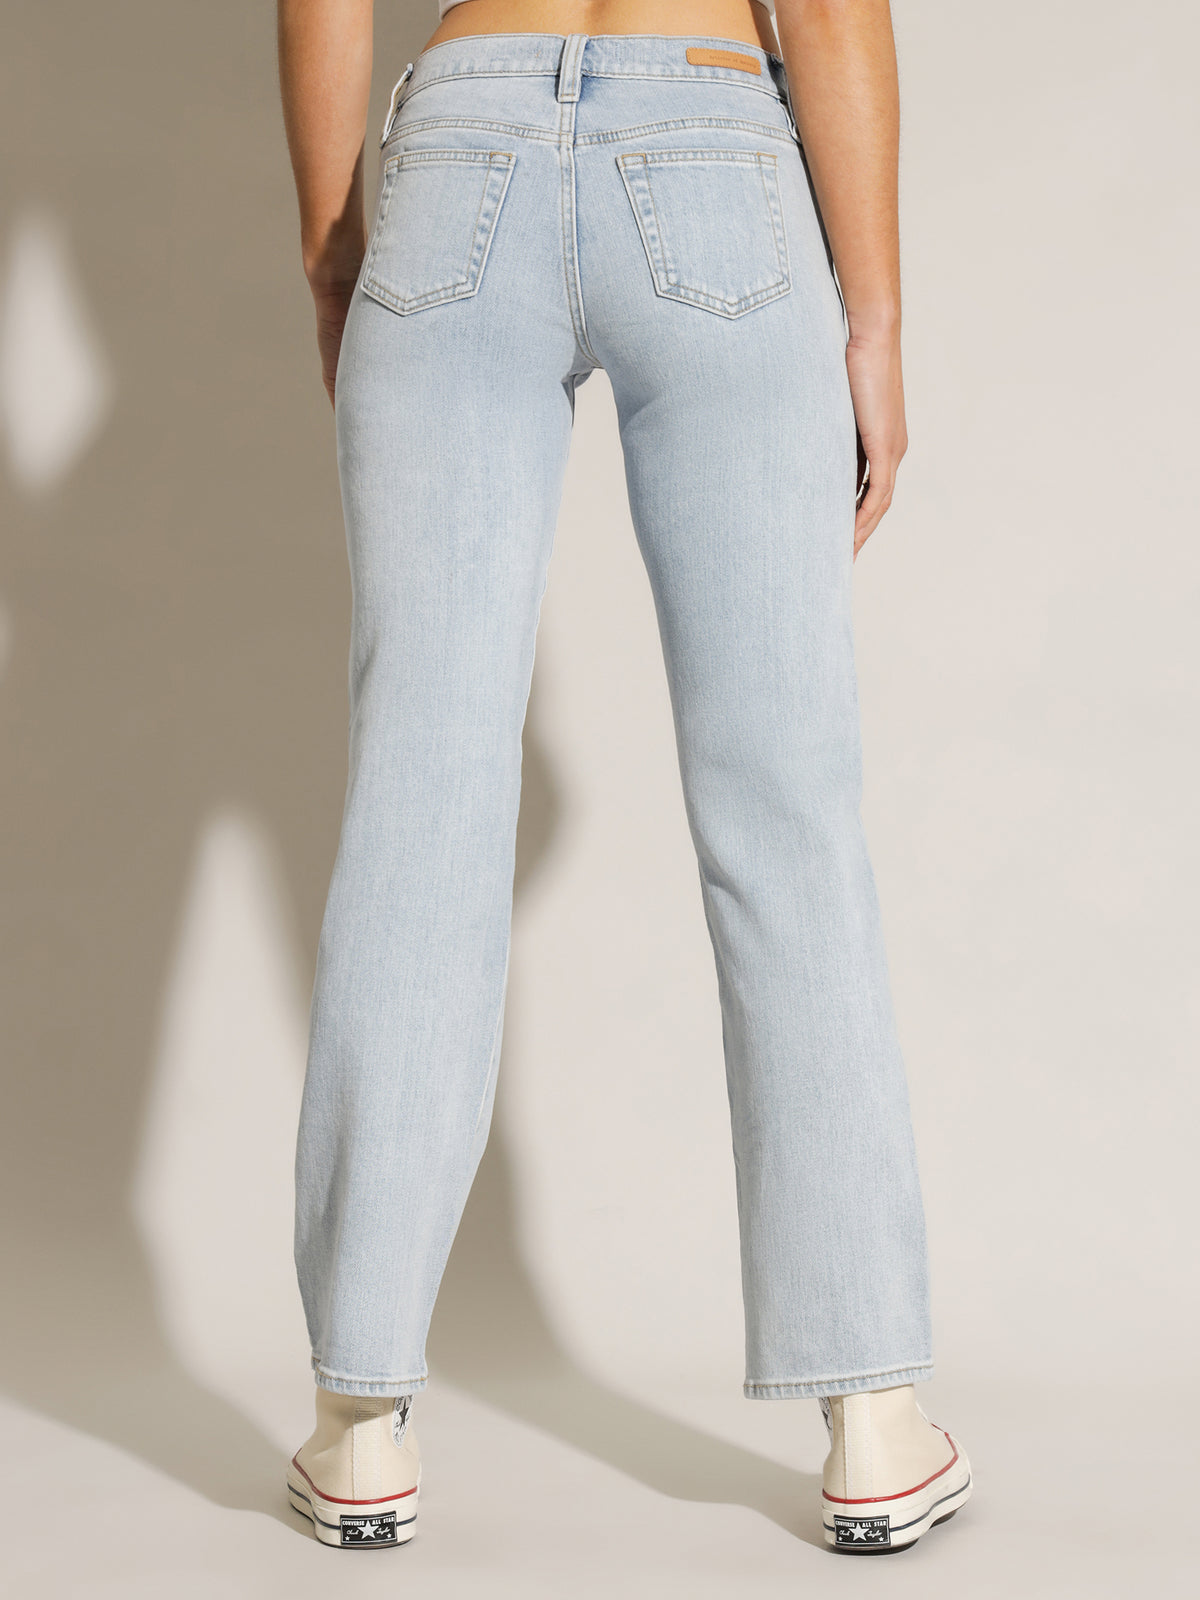 Britney Low Rise Jeans in Fresh Blue